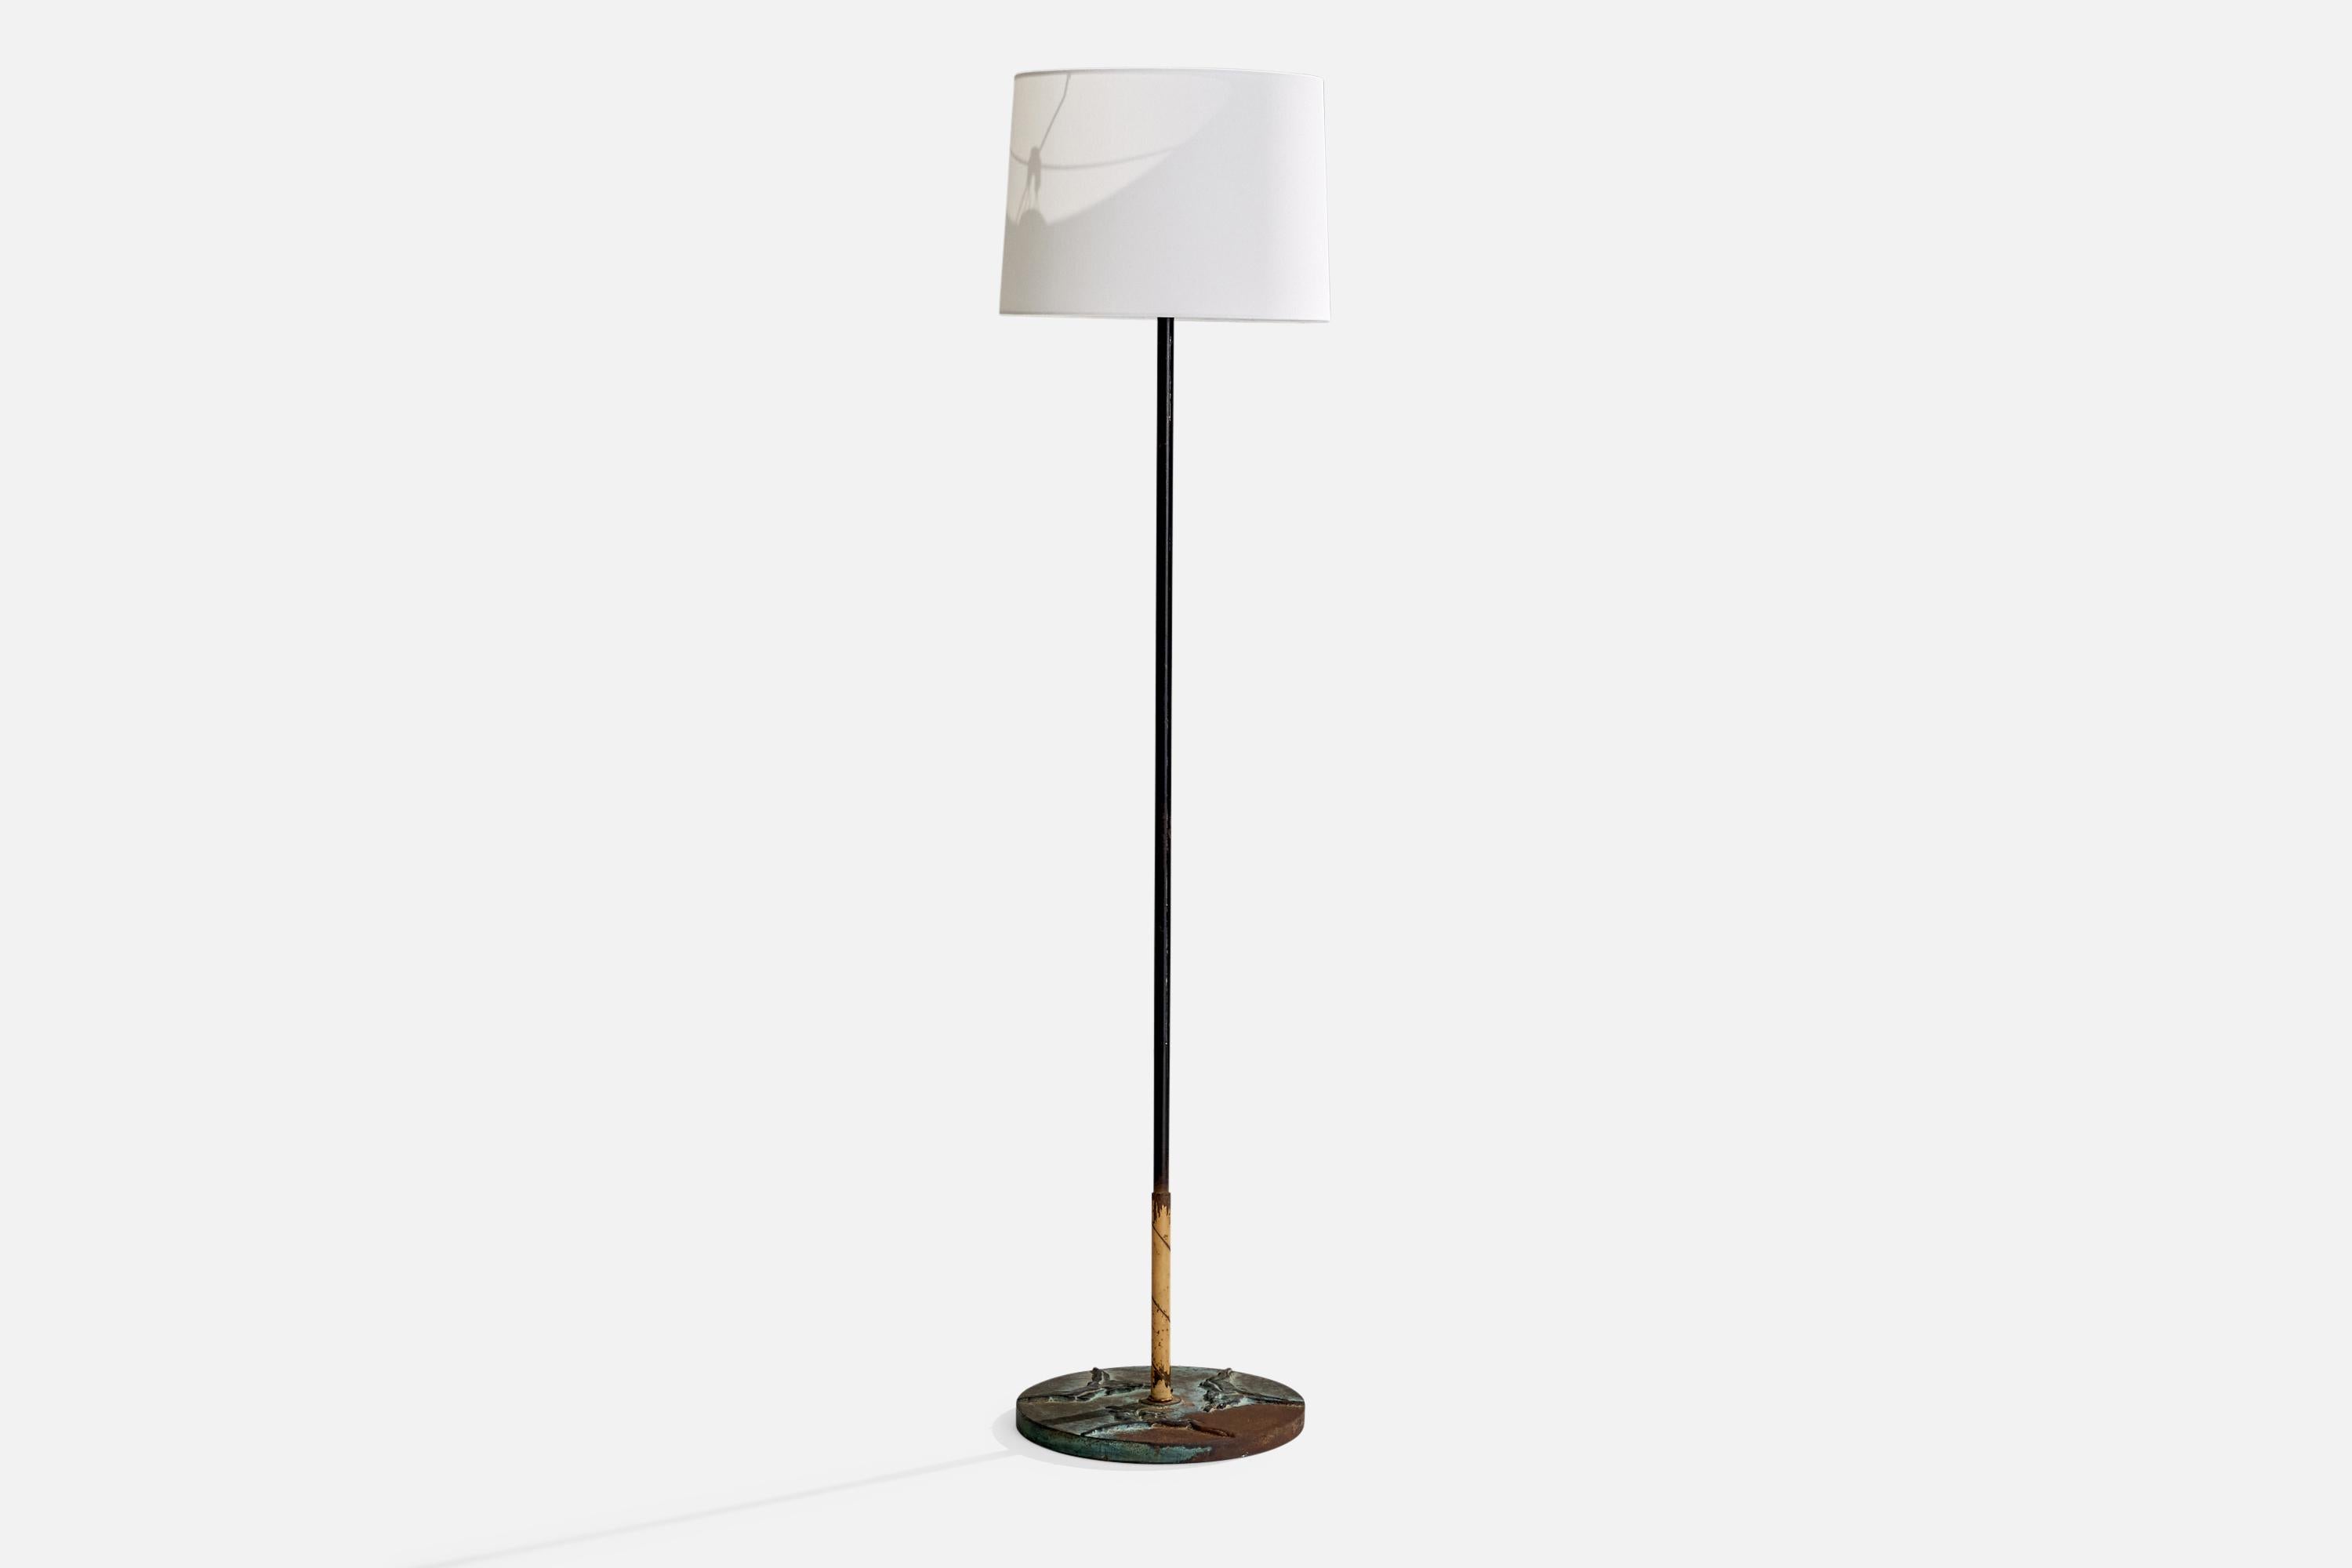 A bronze and beige and black-lacquered metal and white fabric floor lamp designed and produced in Sweden, 1930s.

Overall Dimensions (inches): 53” H x 13” W x 13” D
Stated dimensions include shade.
Bulb Specifications: E-26 Bulb
Number of Sockets: